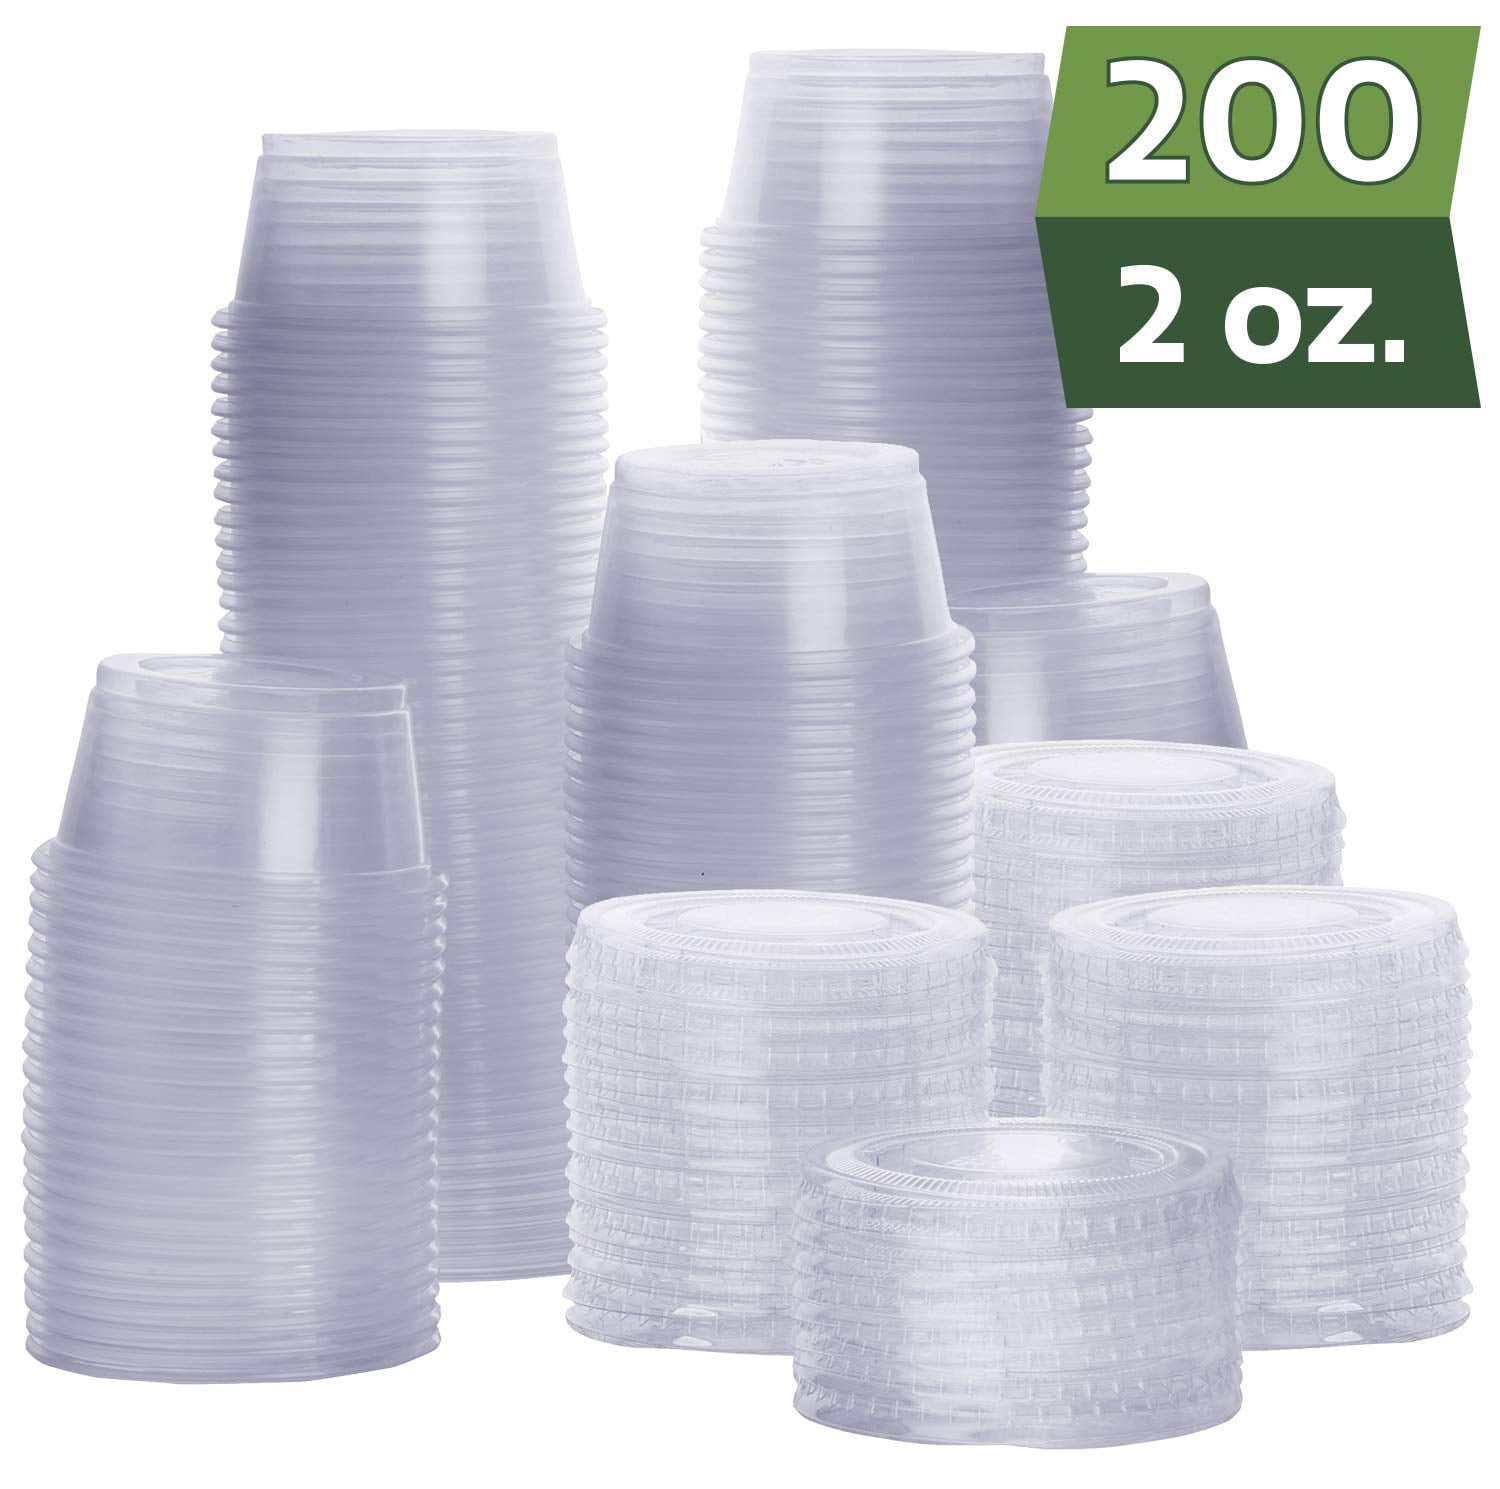 Choose 2 for sale online 100-pack of Disposable Clear Plastic Condiment Storage Cups With Lids 